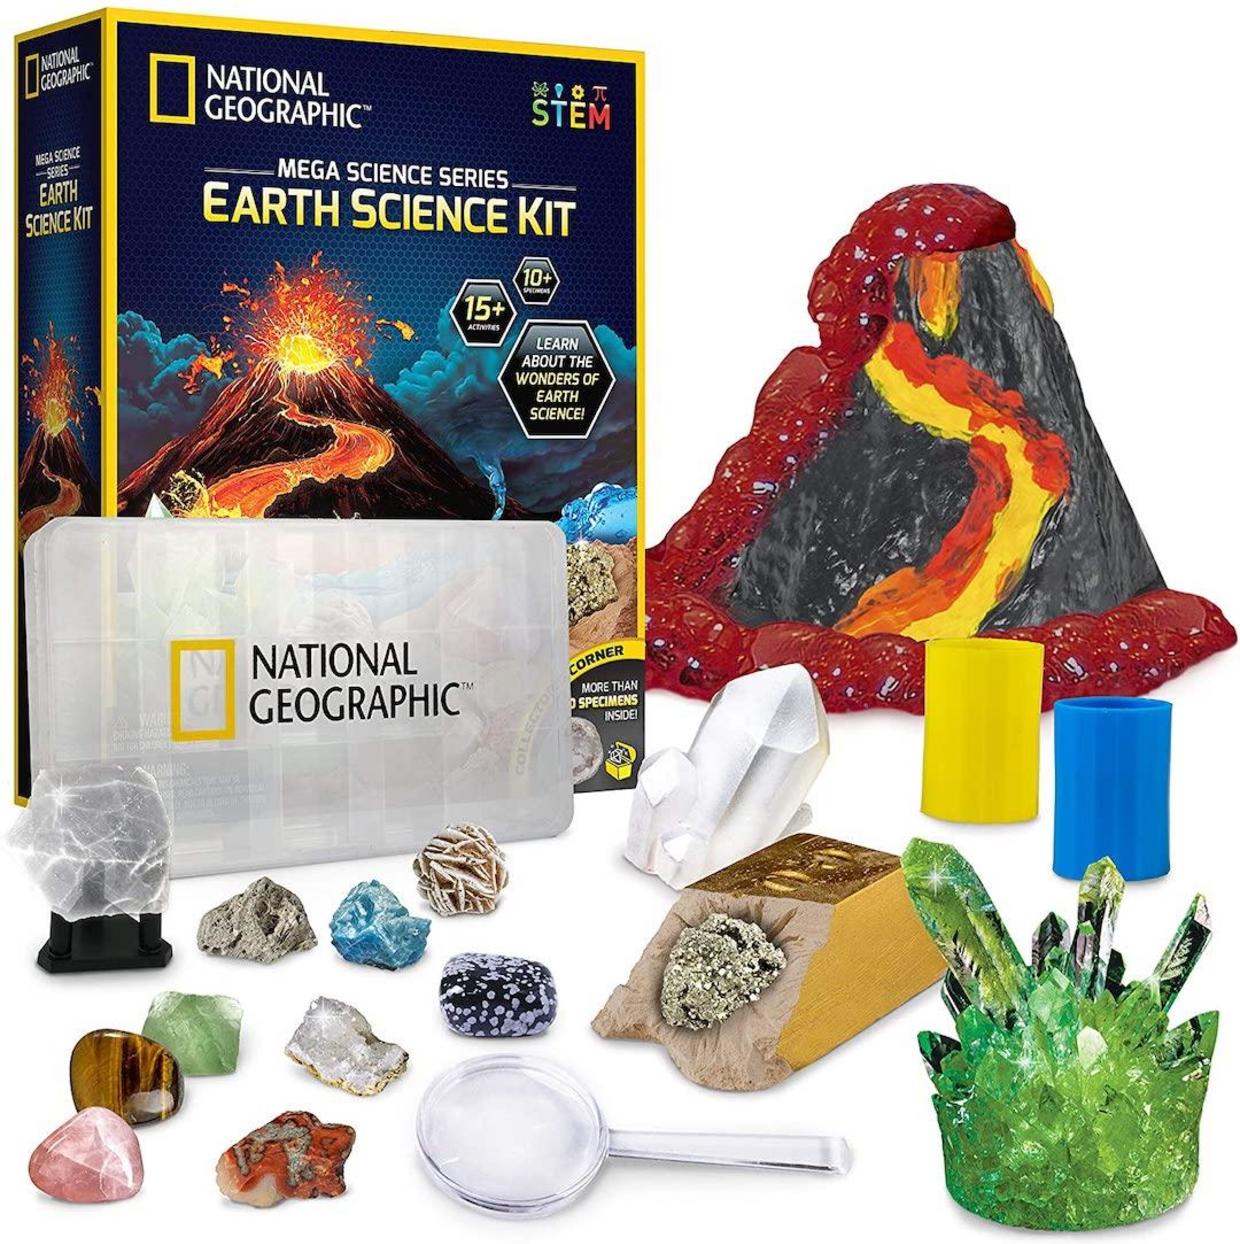 The Earth Science Collection from the National Geographic Mega Science Series